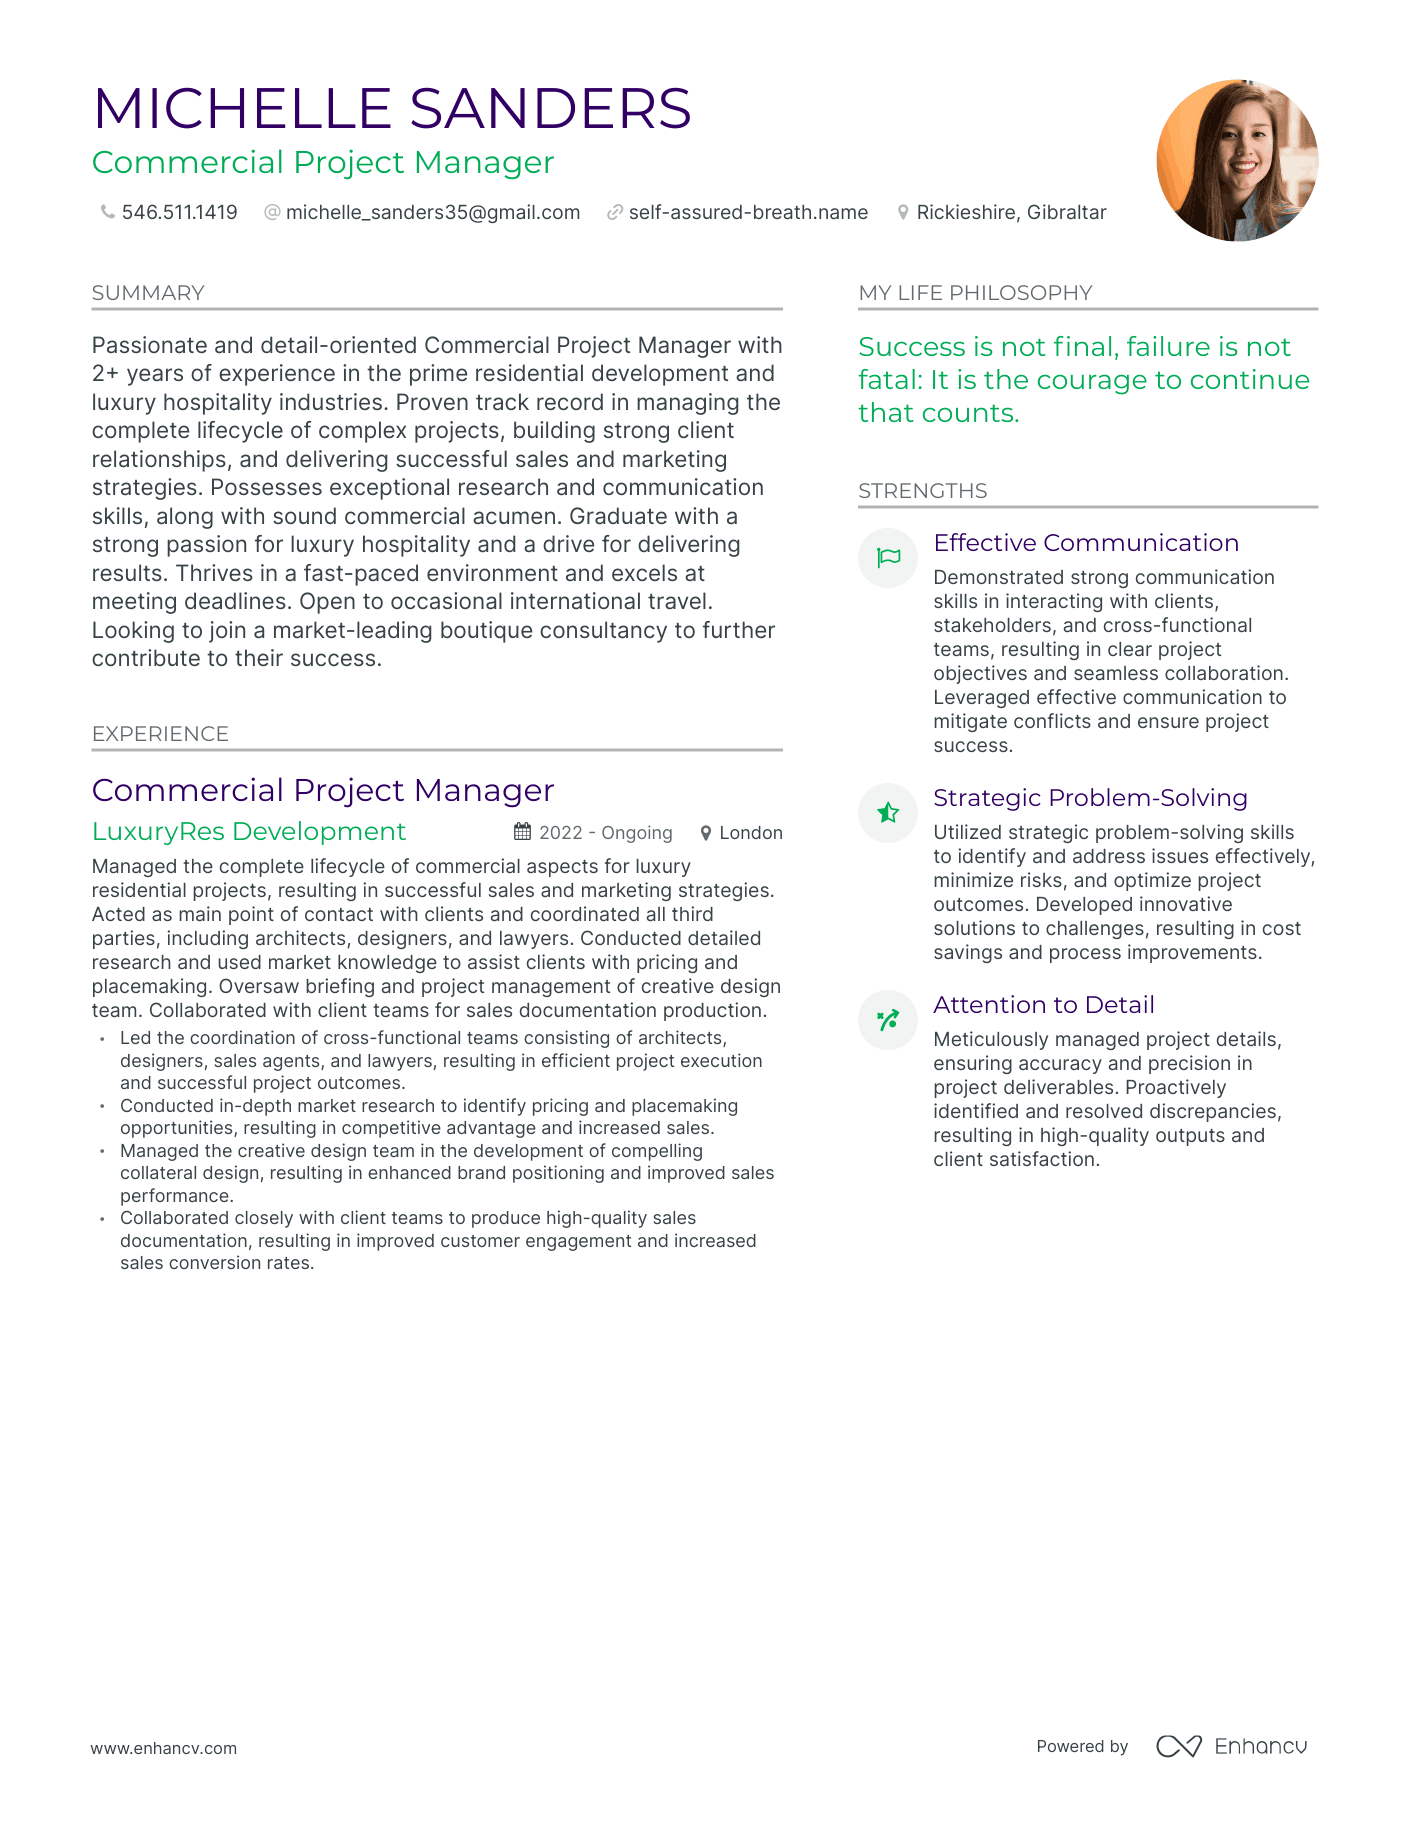 Commercial Project Manager resume example